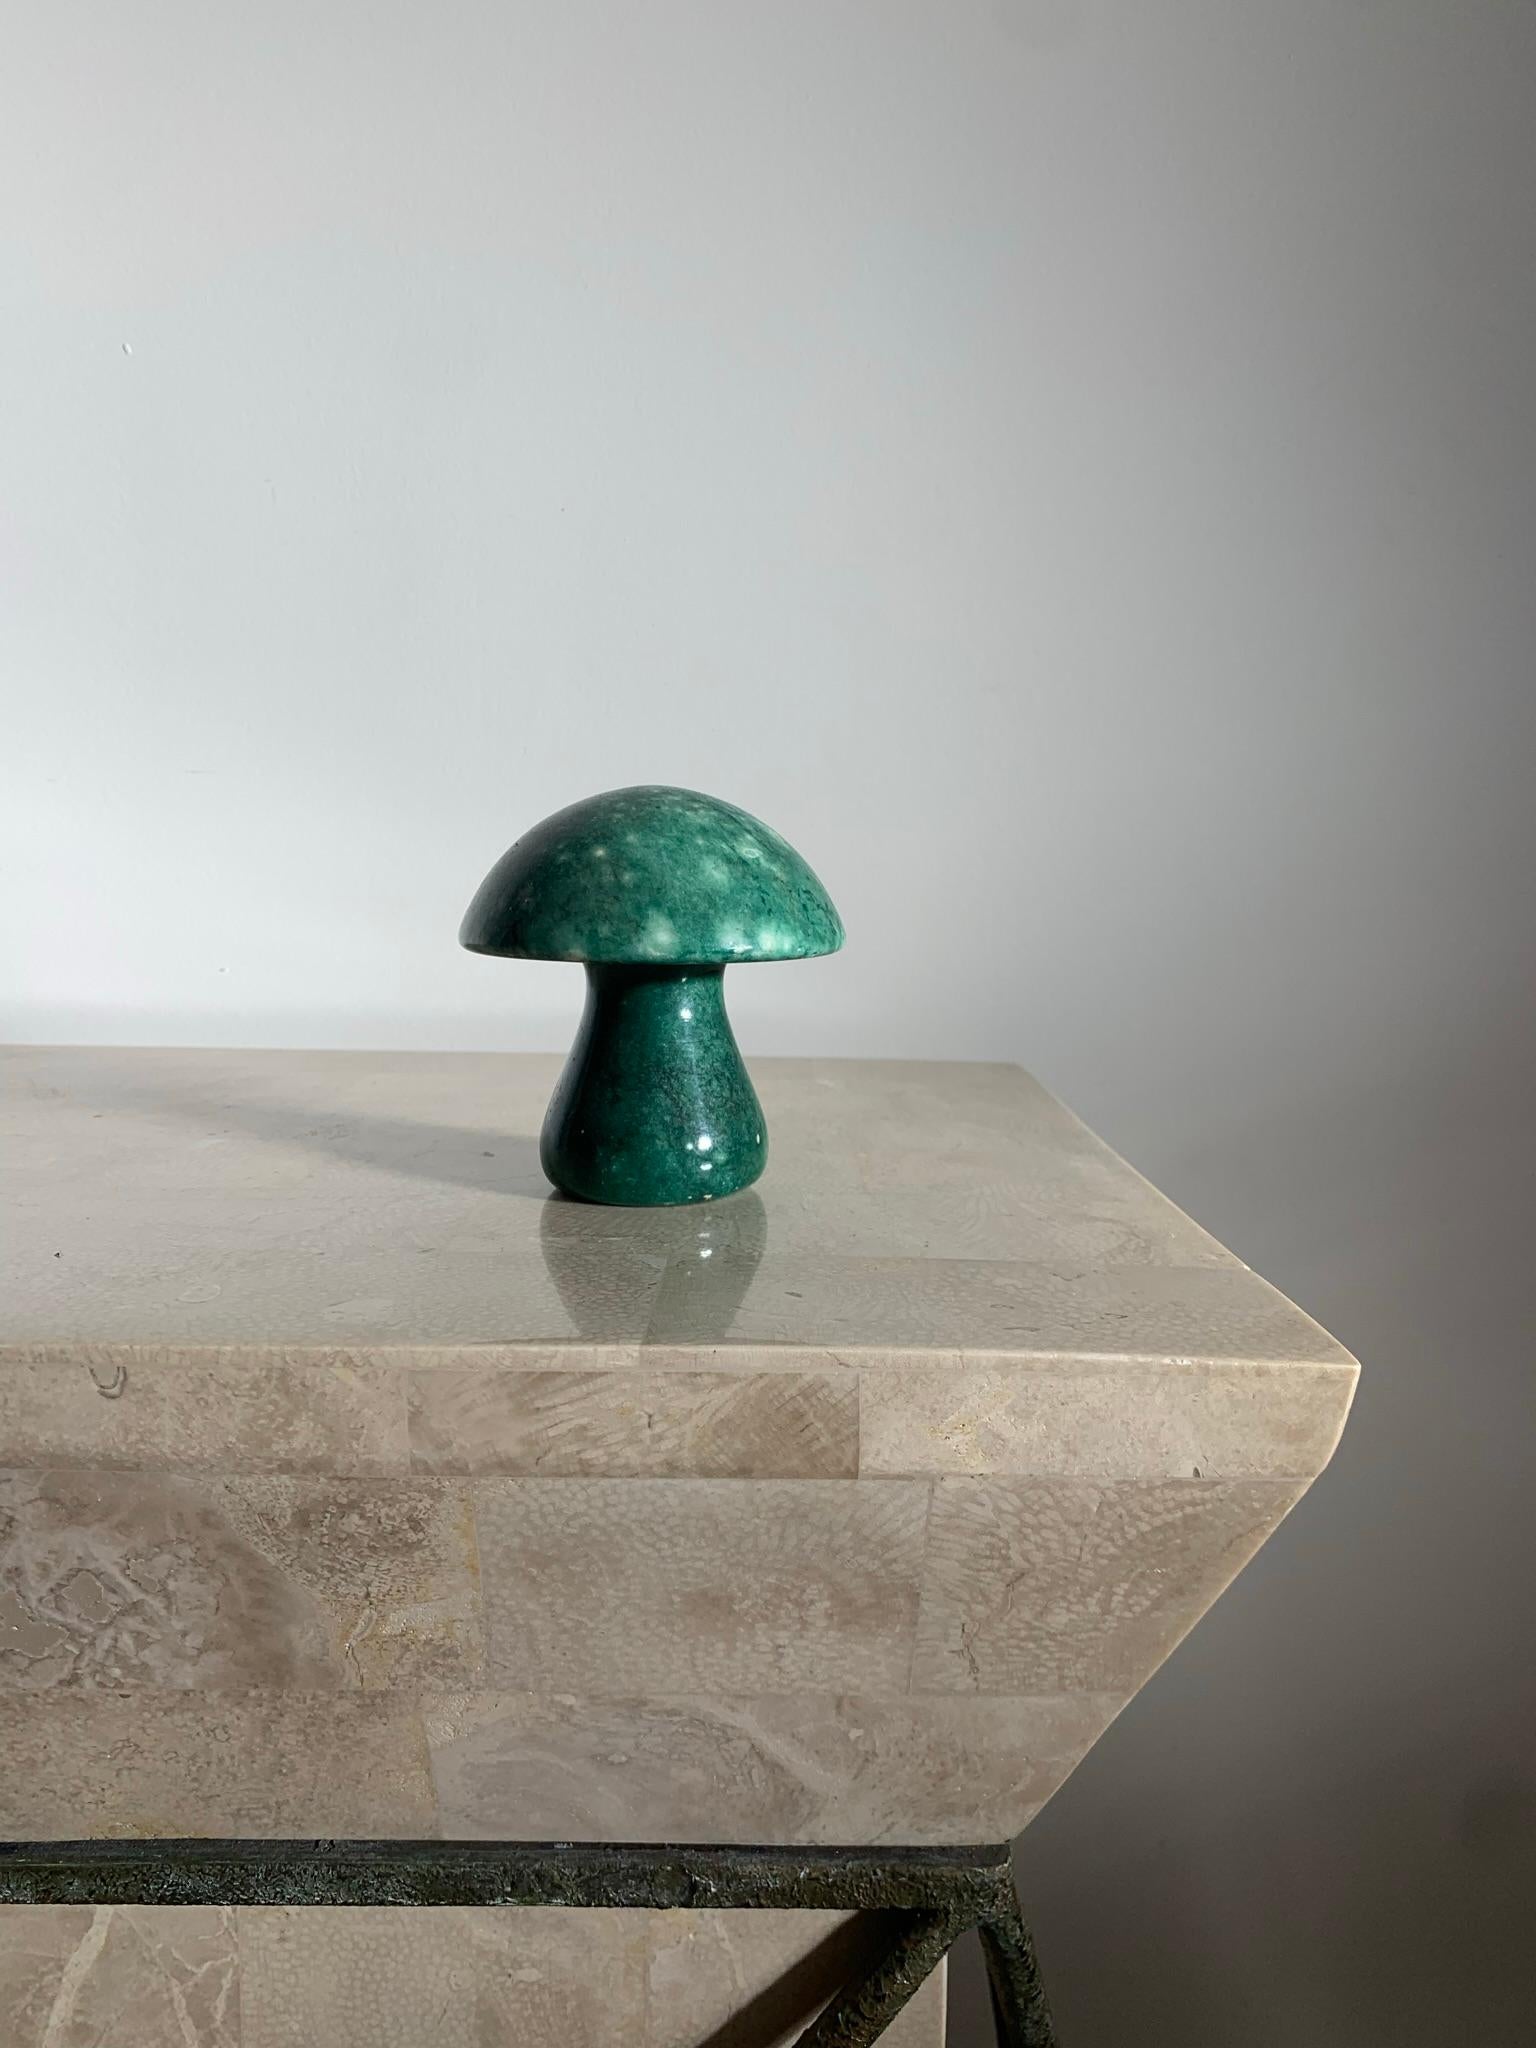 A vintage italian marble mushroom hand-carved in Italy out of Italian alabaster. Circa early 1960s. A brilliant viridian green makes this piece especially rare. Can be used as a paperweight, sculpture, or objet d’art for any lover of psychedelia or